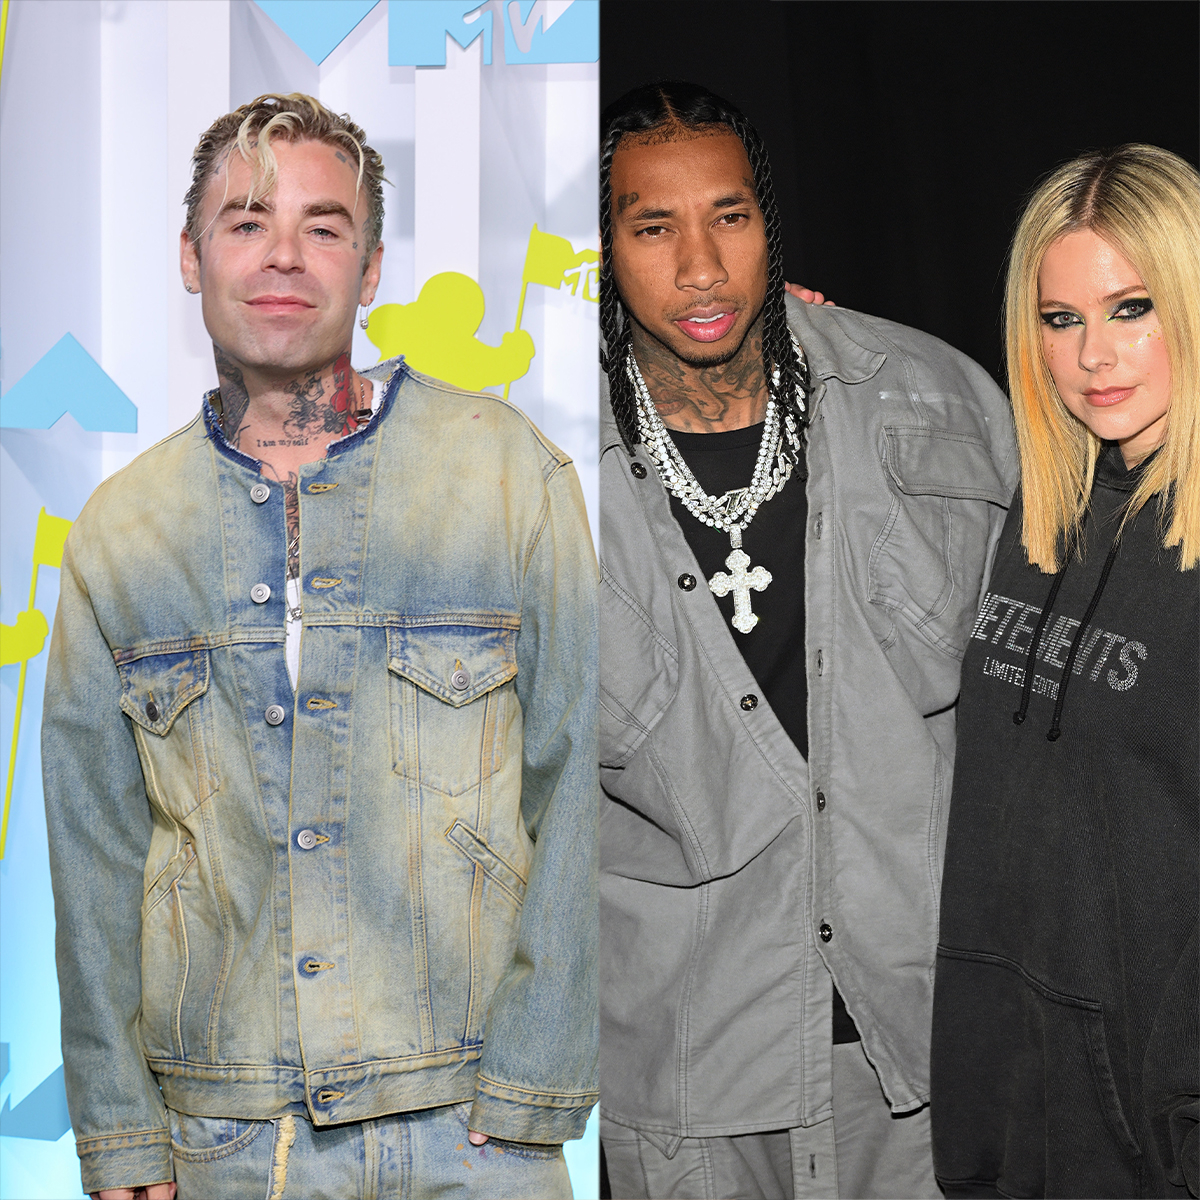 Mod Sun Shared Cryptic Message About “Real Friends” Before Avril Lavigne Confirmed Tyga Romance – E! Online